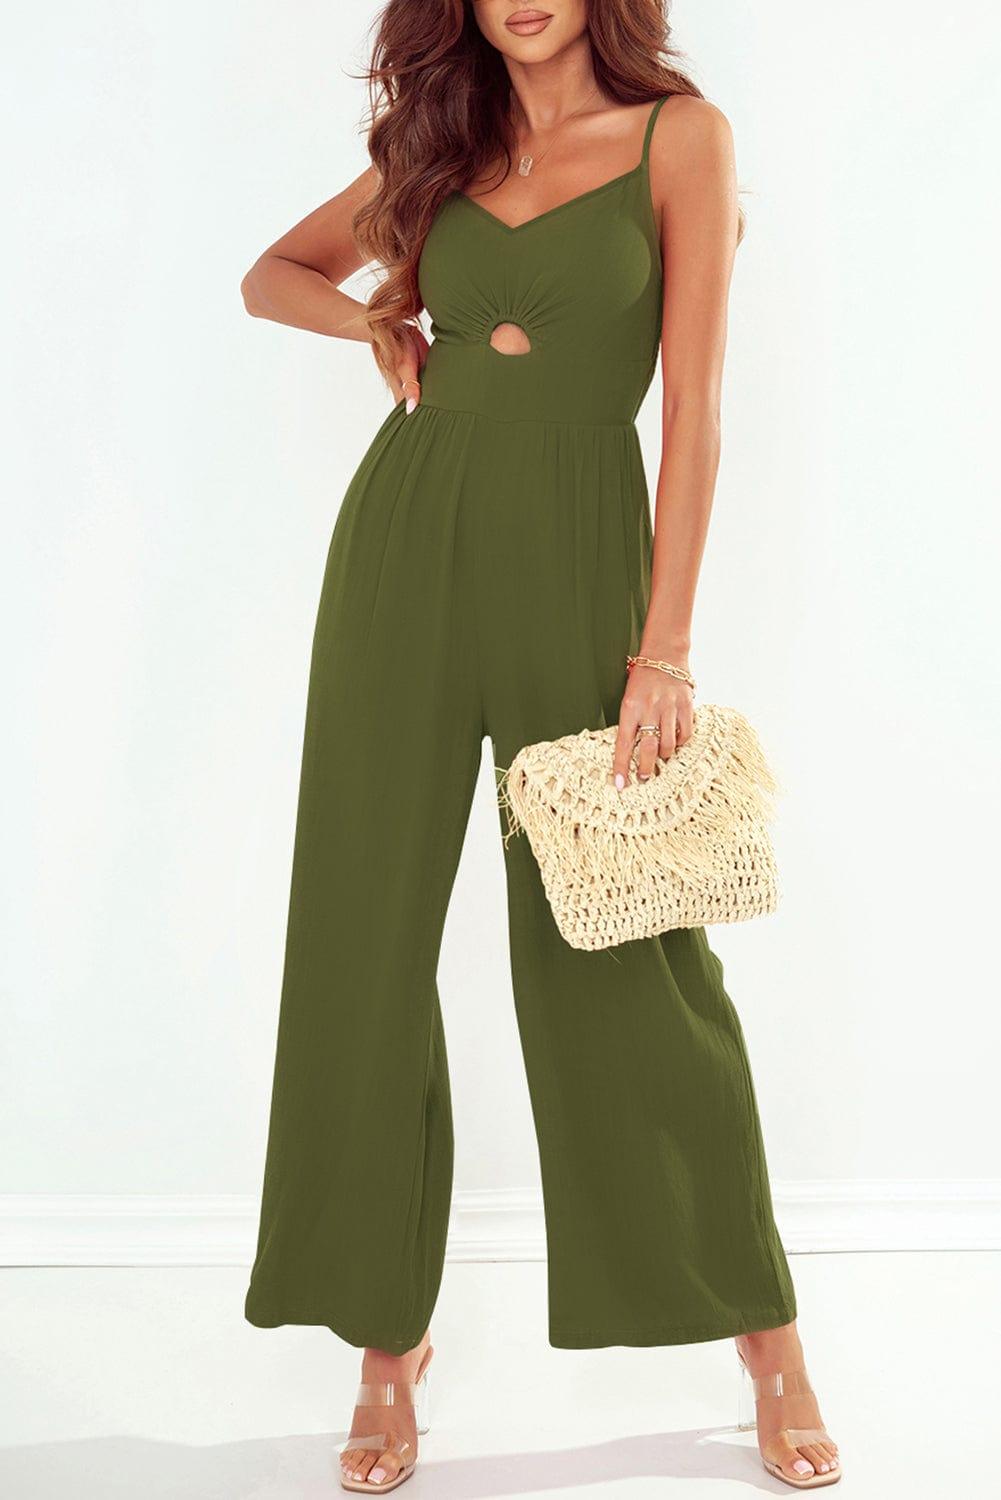 White Label Jumpsuits & Rompers Moss / S Smocked Spaghetti Strap Wide Leg Jumpsuit